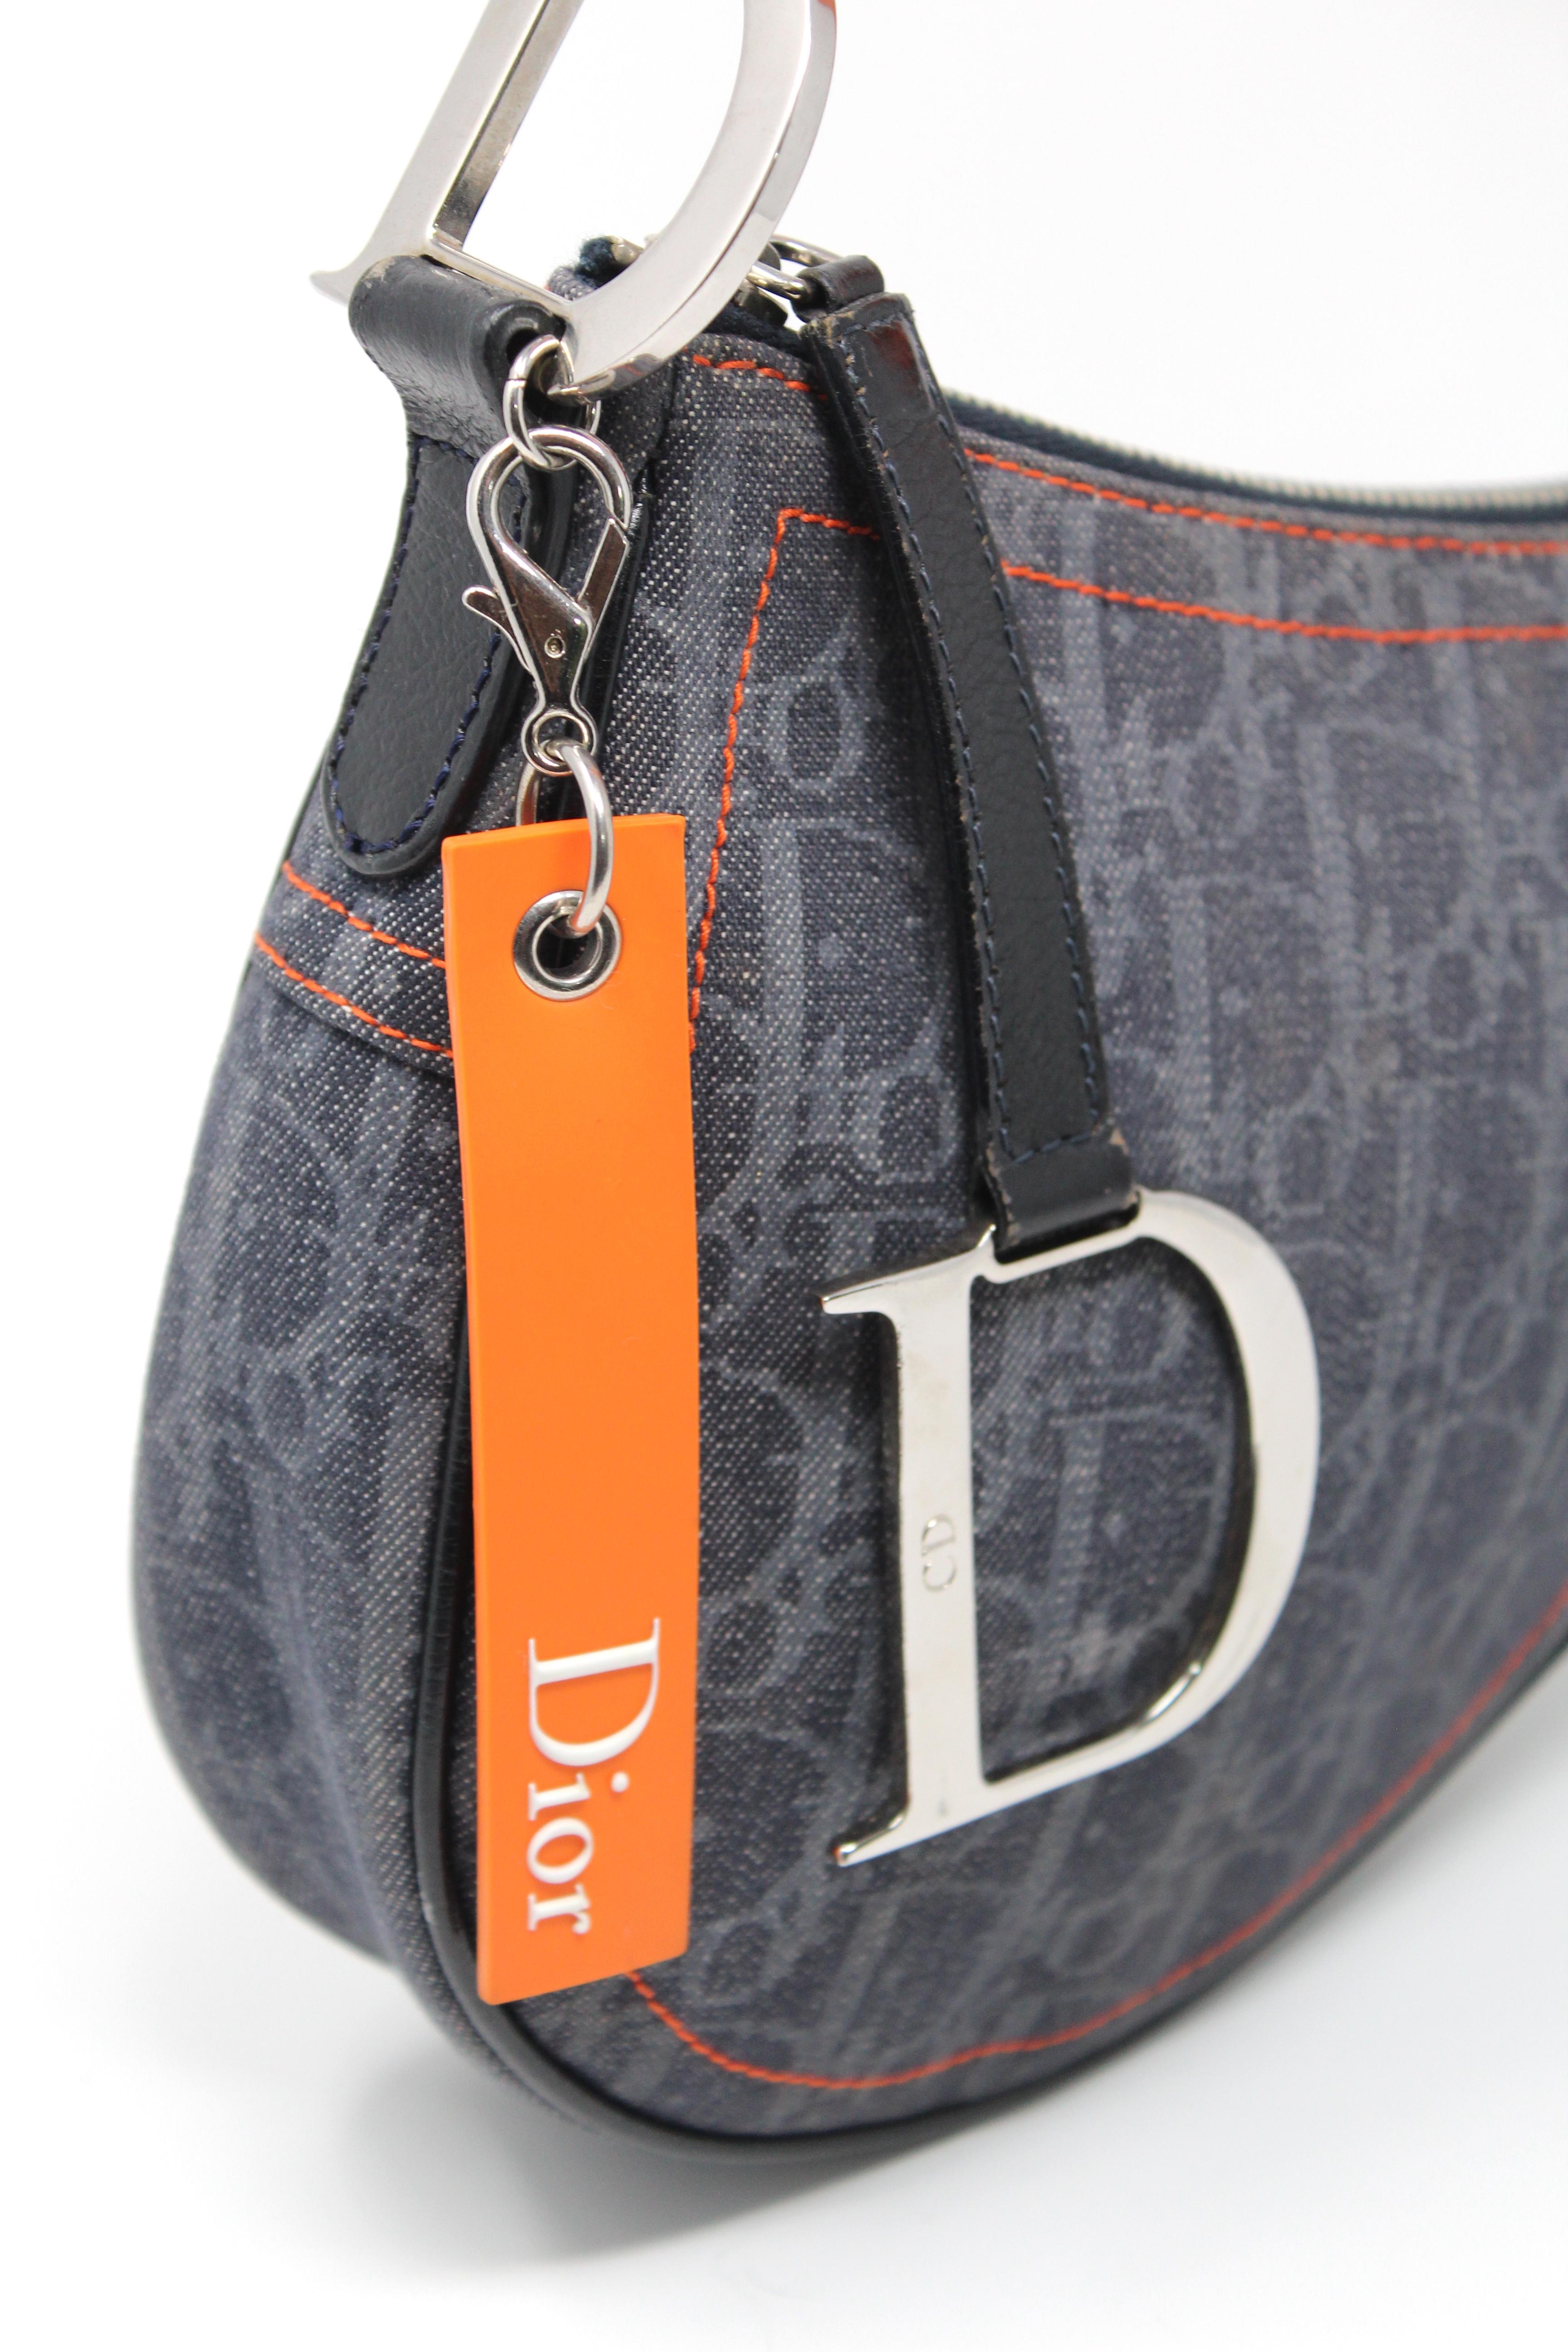 dior certificate of authenticity